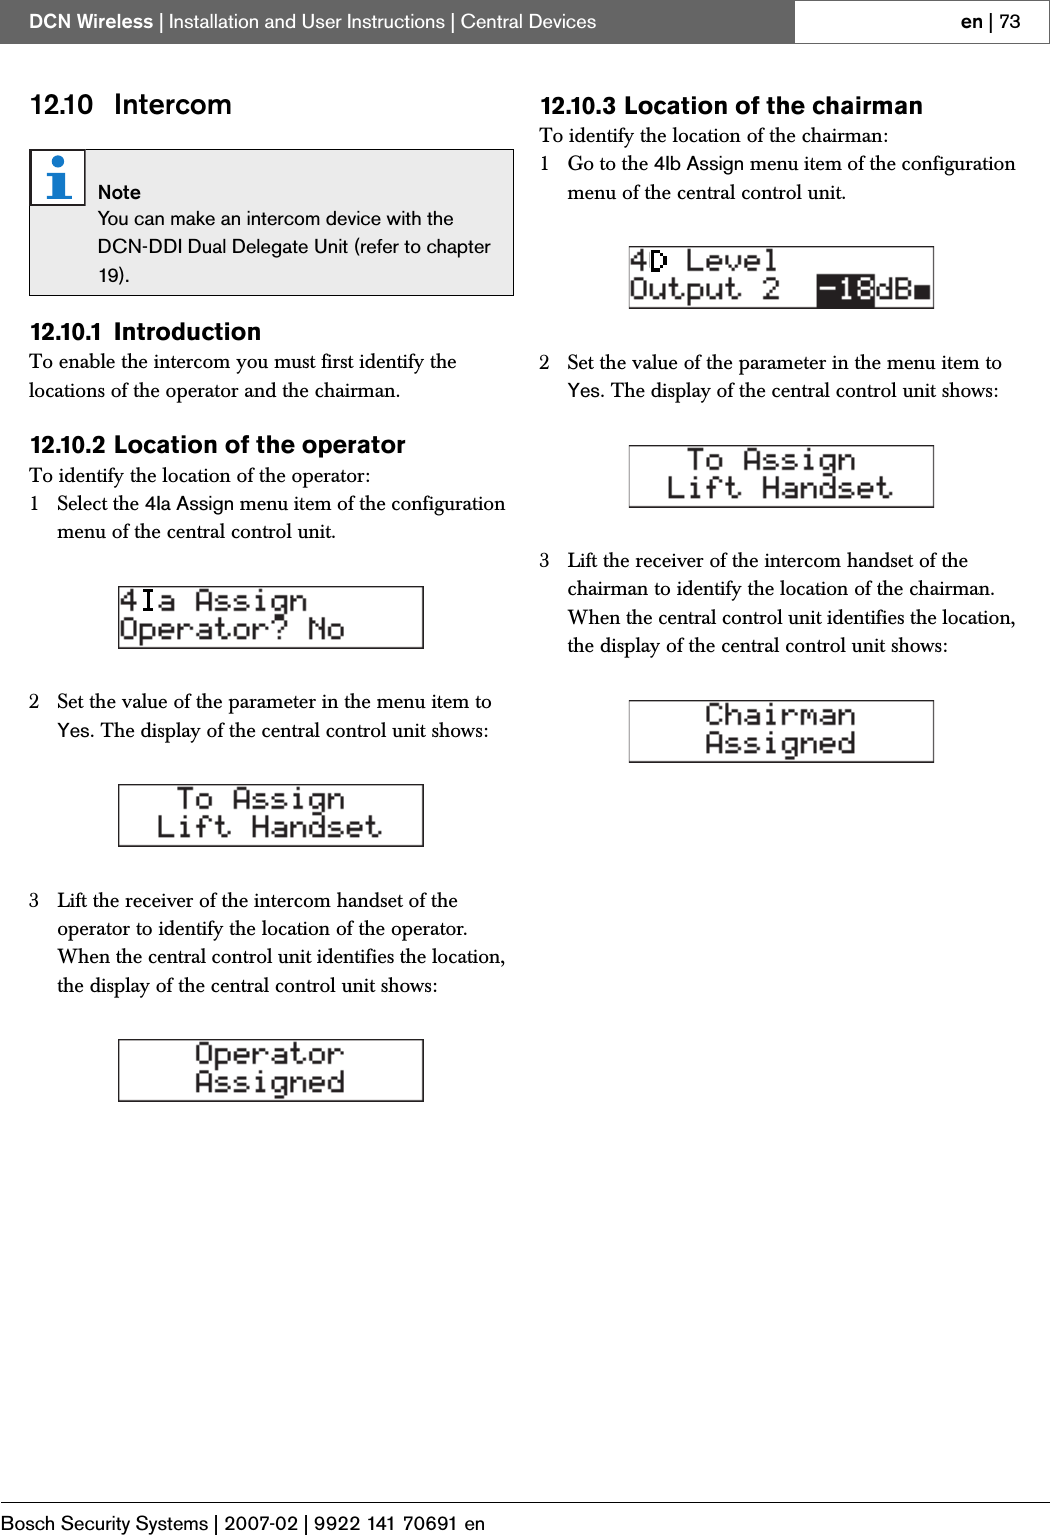 Page 44 of Bosch Security Systems DCNWAP Wireless Access Point User Manual Part 2